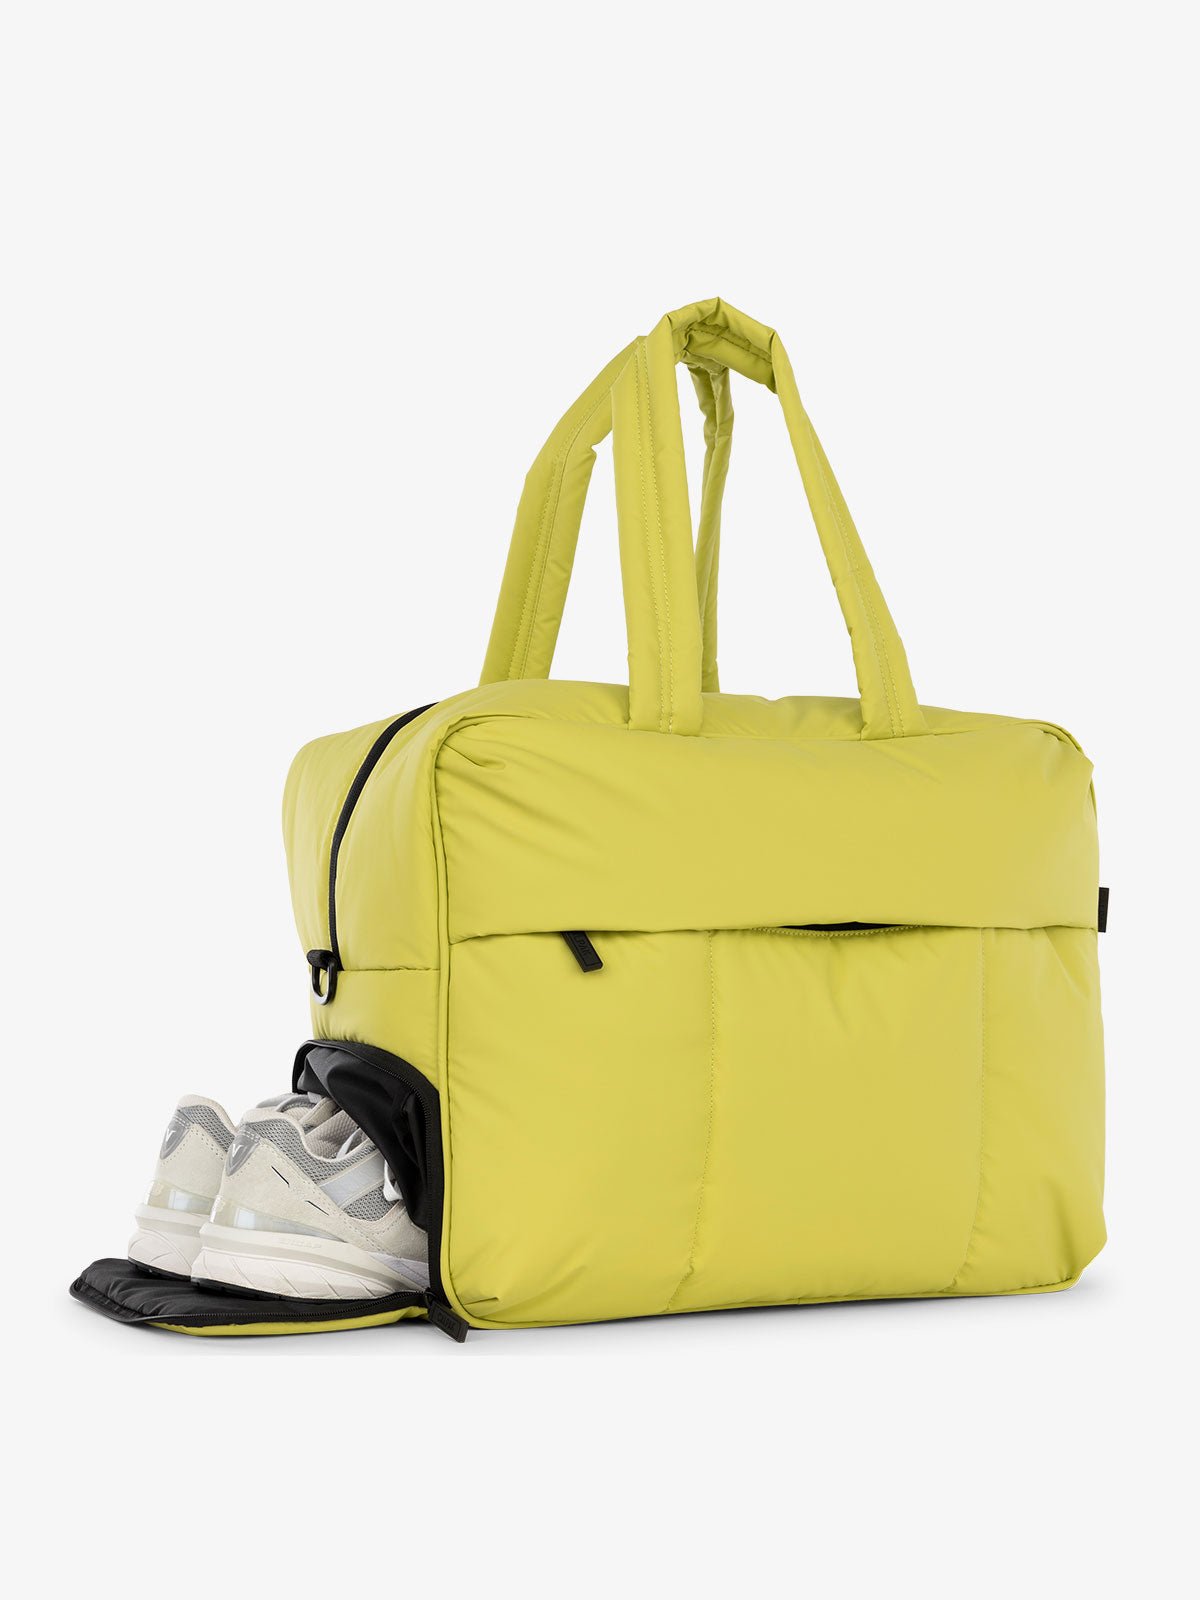 CALPAK Luka large duffel bag with side shoe compartment and dual handles in celery green